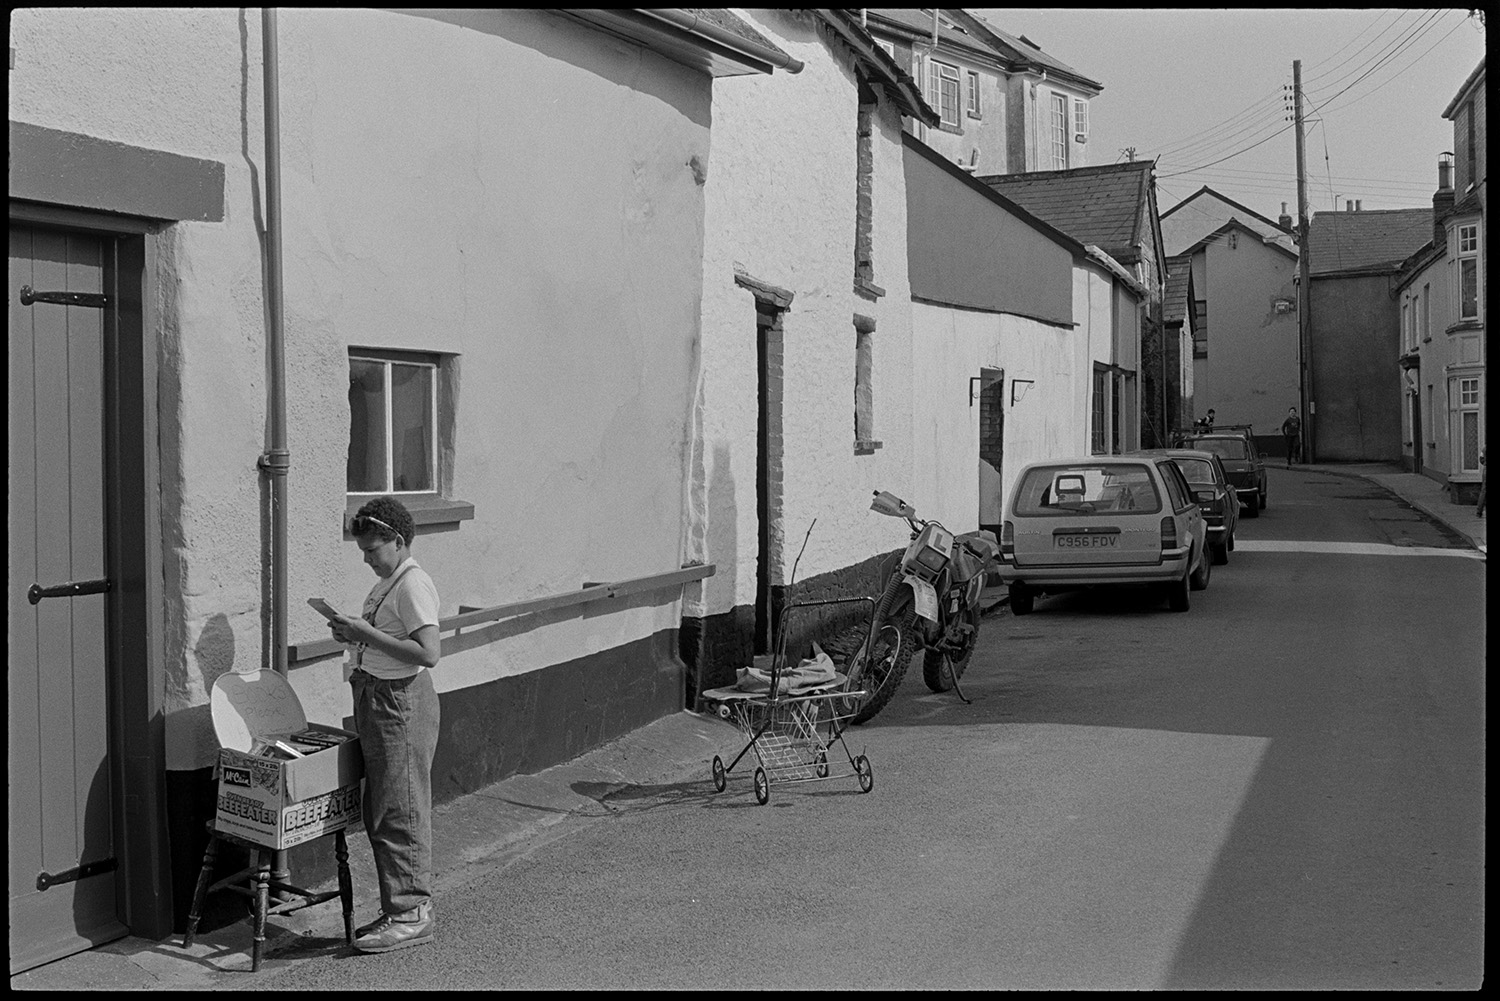 Street scenes with motorbikes.
[A person looking a books in a box on a stool in a street in Chulmleigh. Parked cars, a motorbike and pram wheels are visible along the road.]